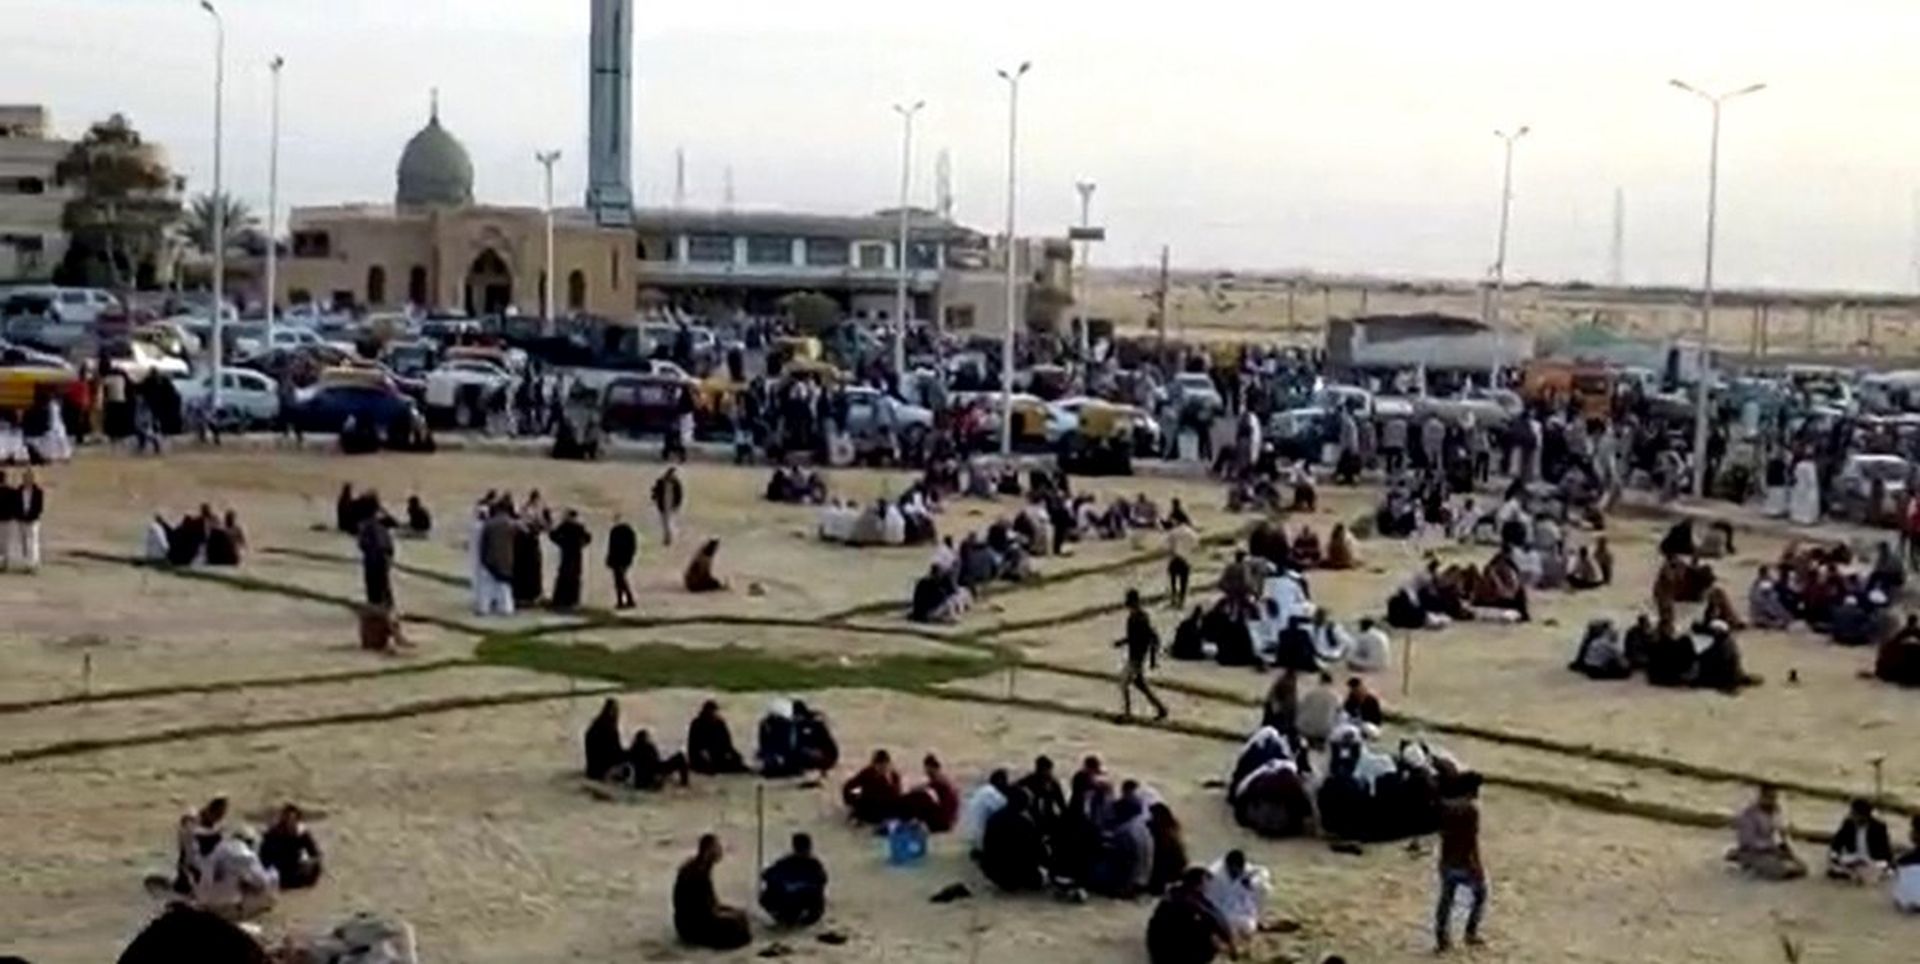 epa06348800 A grab image taken from taken from a video footage shows people gathering outside the mosque that was attacked in the northern city of Arish, Sinai Peninsula, Egypt, 24 November 2017. According to reports, at least 270 people were killed and 90 injured after a bomb was detonated at a mosque and fire opened on worshippers in the Sinai town of Bir al-Abd, near Arish.  EPA/STR BEST QUALITY AVAILABLE